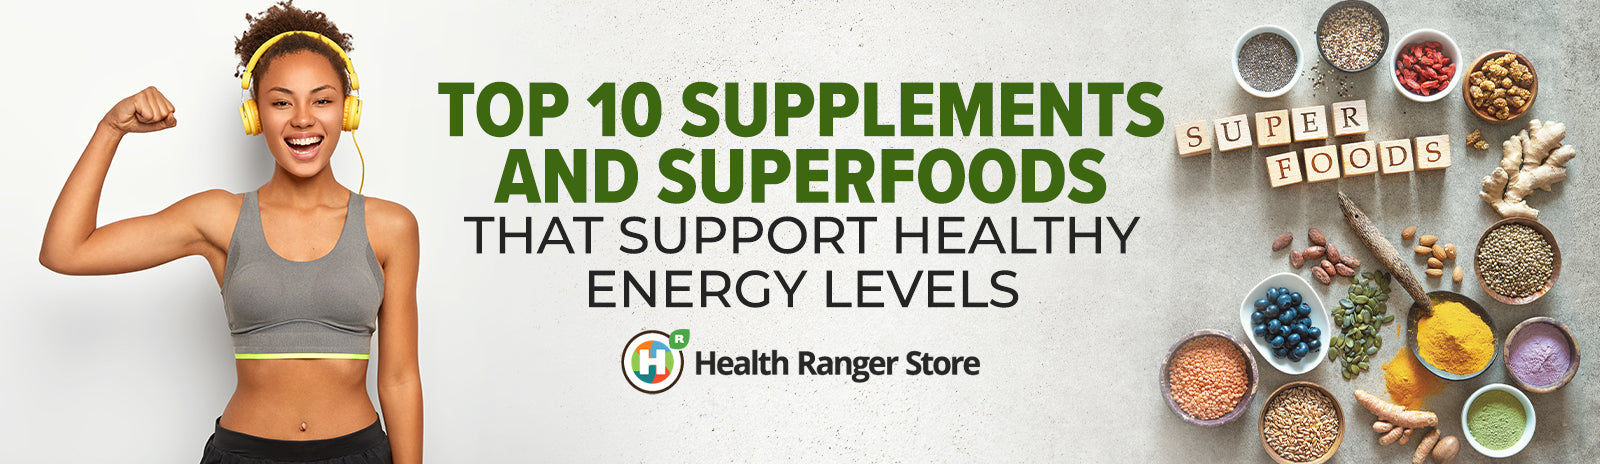 Top 10 Supplements and superfoods that support healthy energy levels